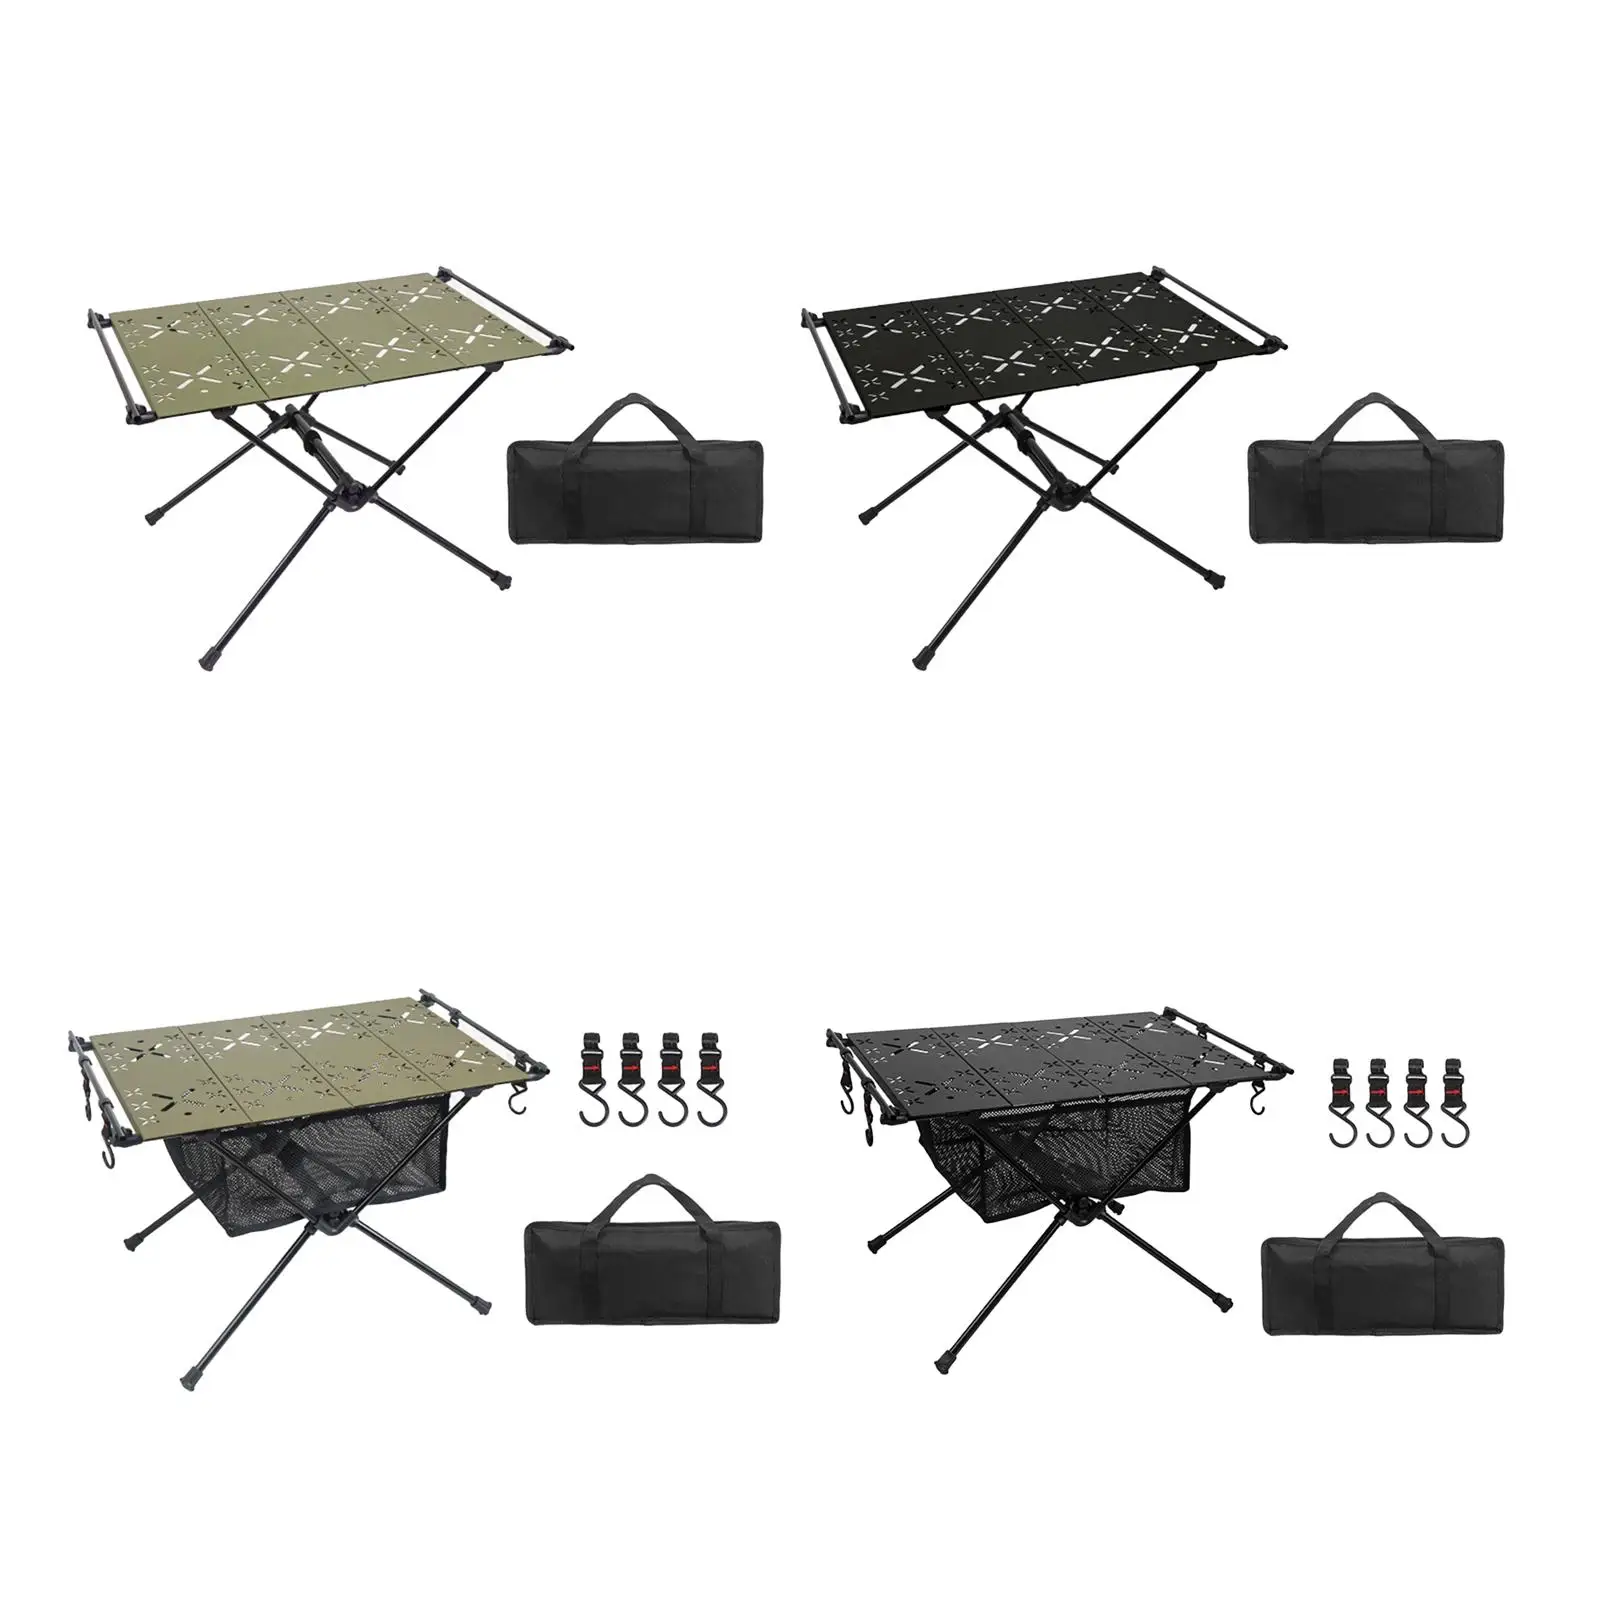 Folding Camping Table Aluminum Alloy Camping Desk for Travel Hiking Backyard